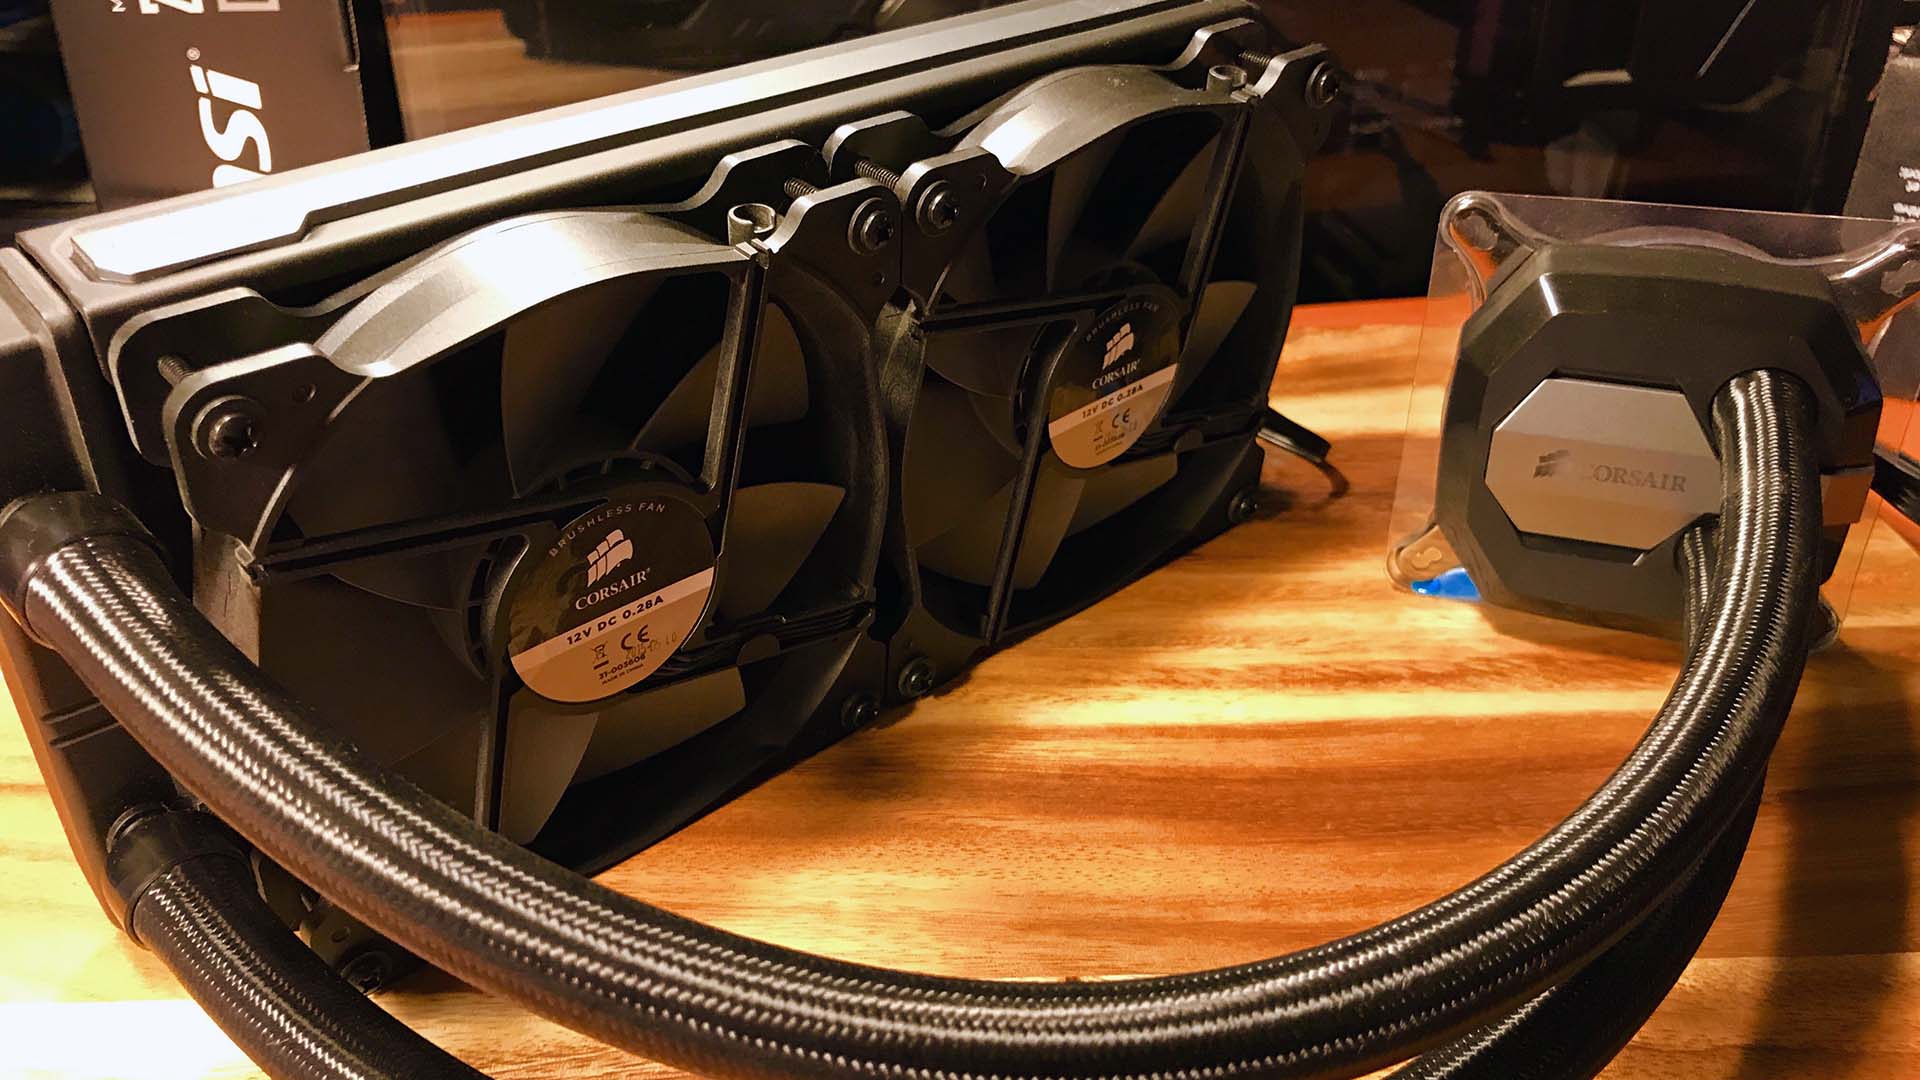 Photograph of a Corsair all-in-one cooler.